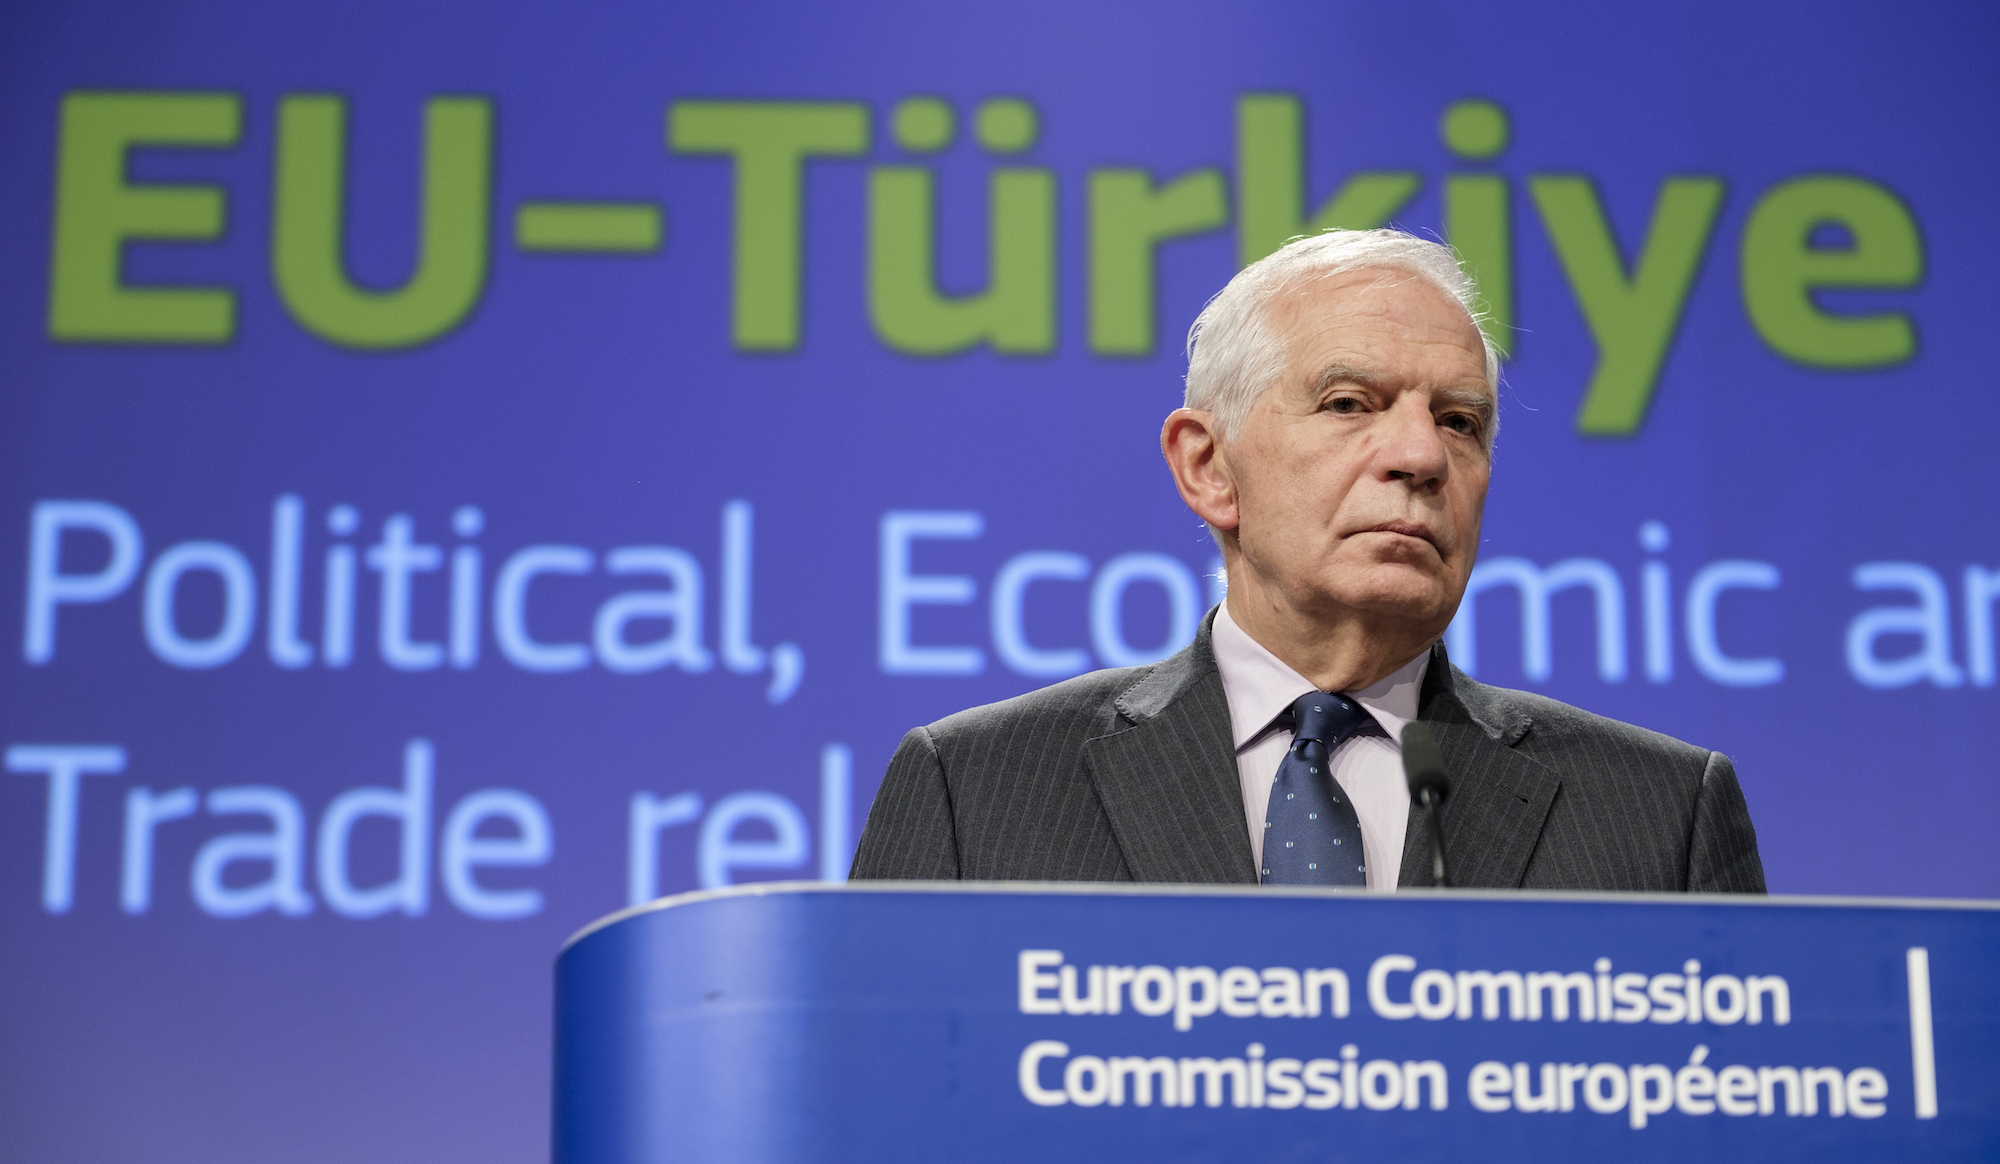 Josep Borrell is seen during a press conference in Brussels on November 29.